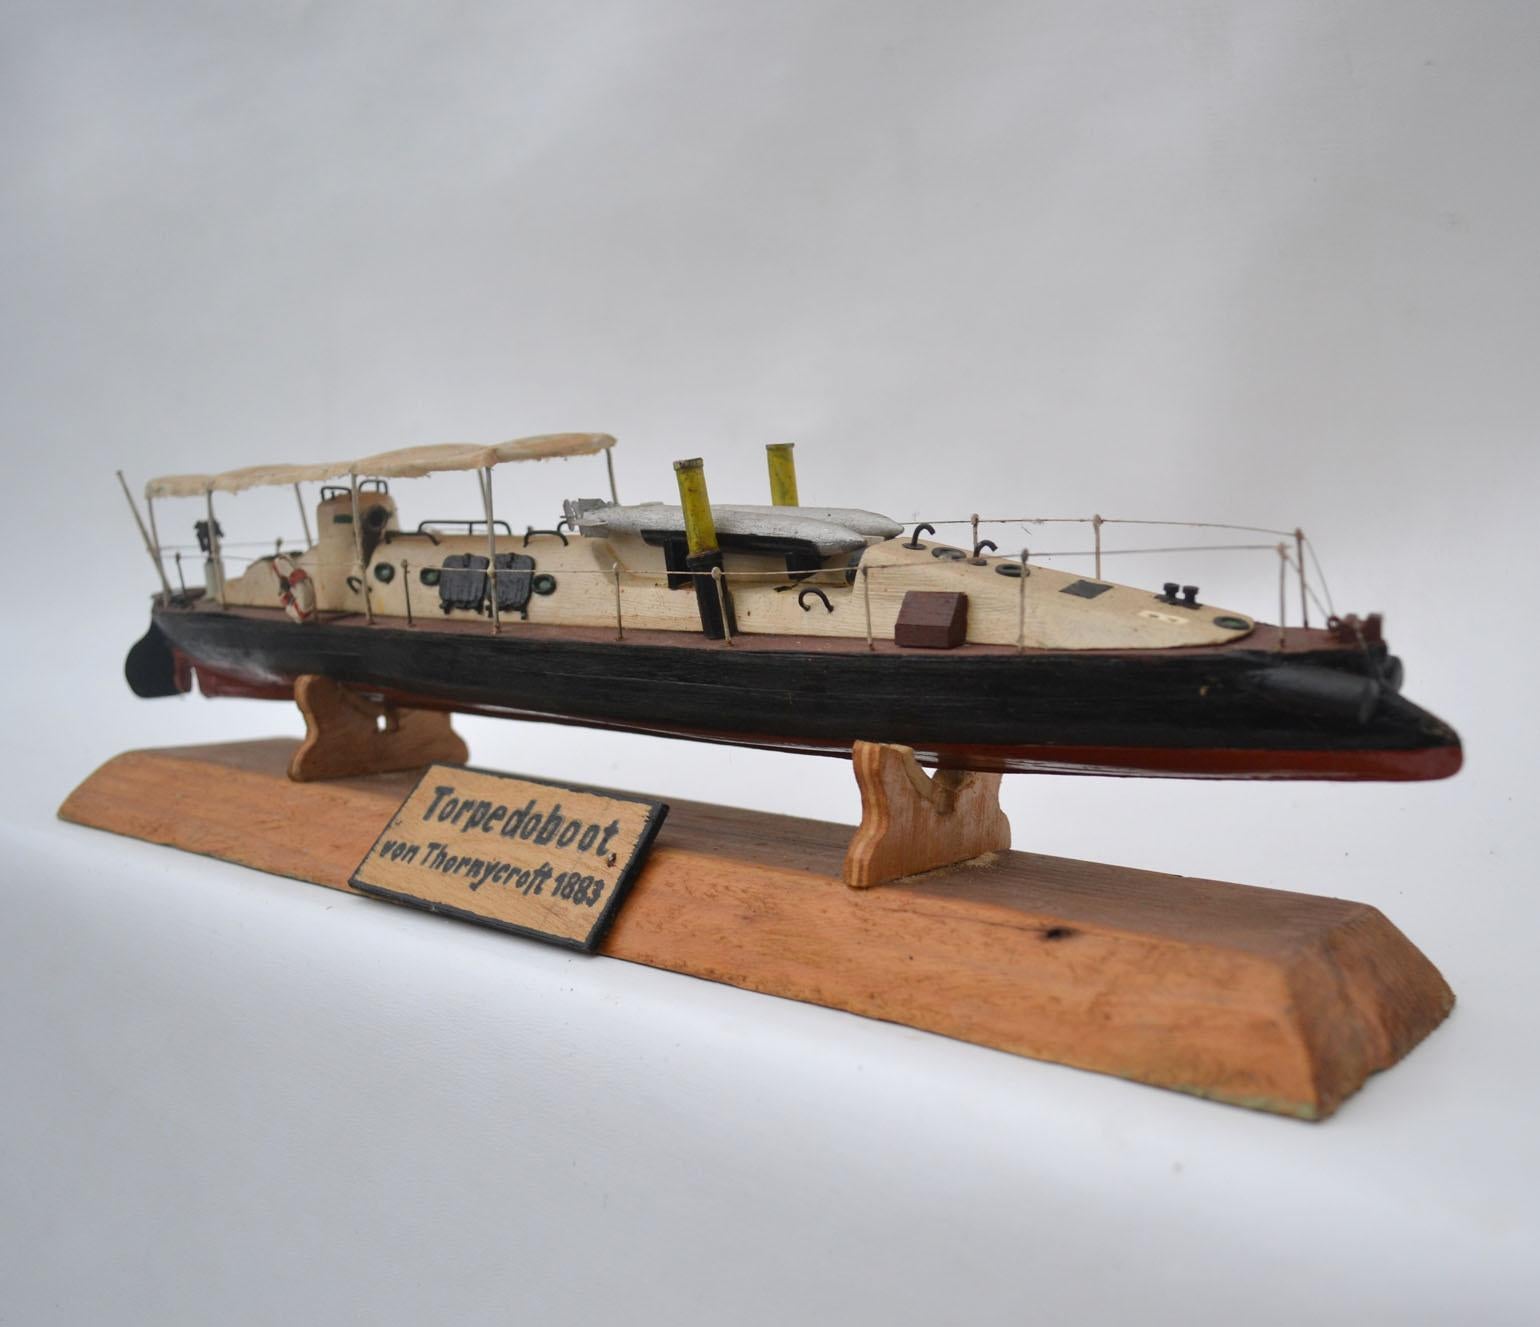 Model of an early Torpedo ship was handcrafted between early to mid 20th century in Eastern Europe. This Torpedo boat is a relatively small and fast naval ship that was designed to carry torpedoes into battle. 
This a highly detailed model came from